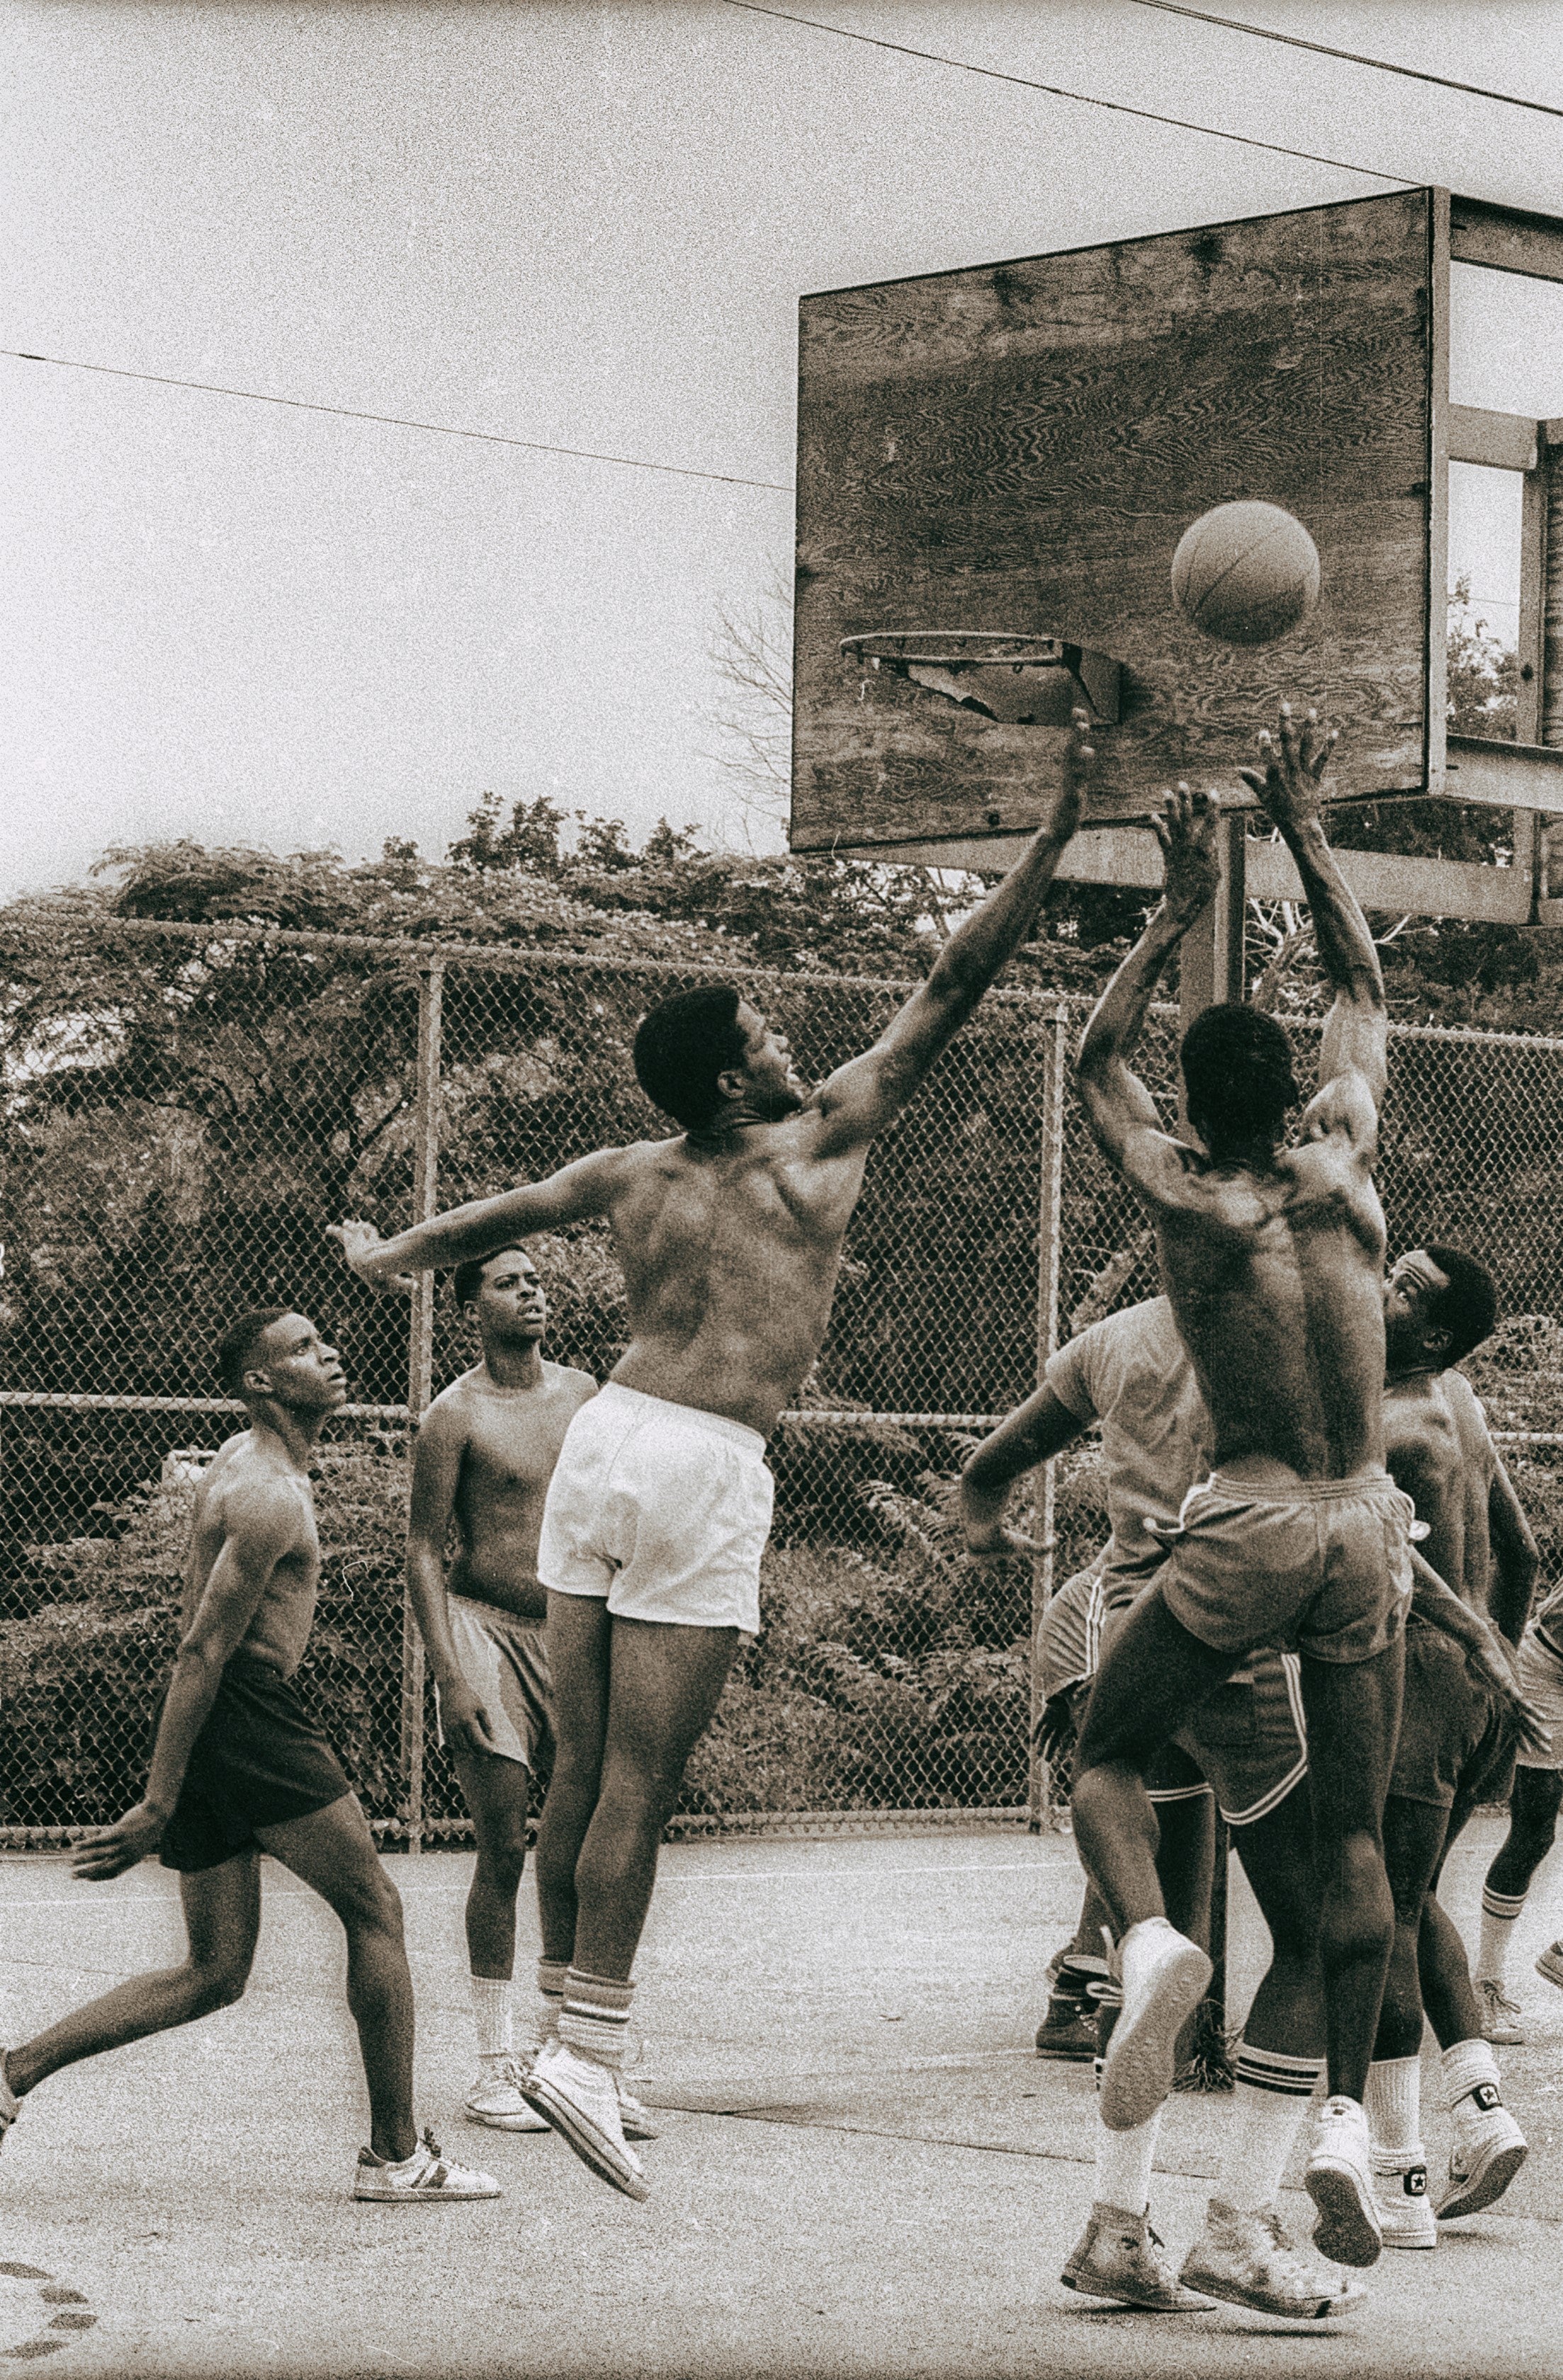 In a basketball game, a man is shooting the ball and a second man is leaping to block the shot while others look on.